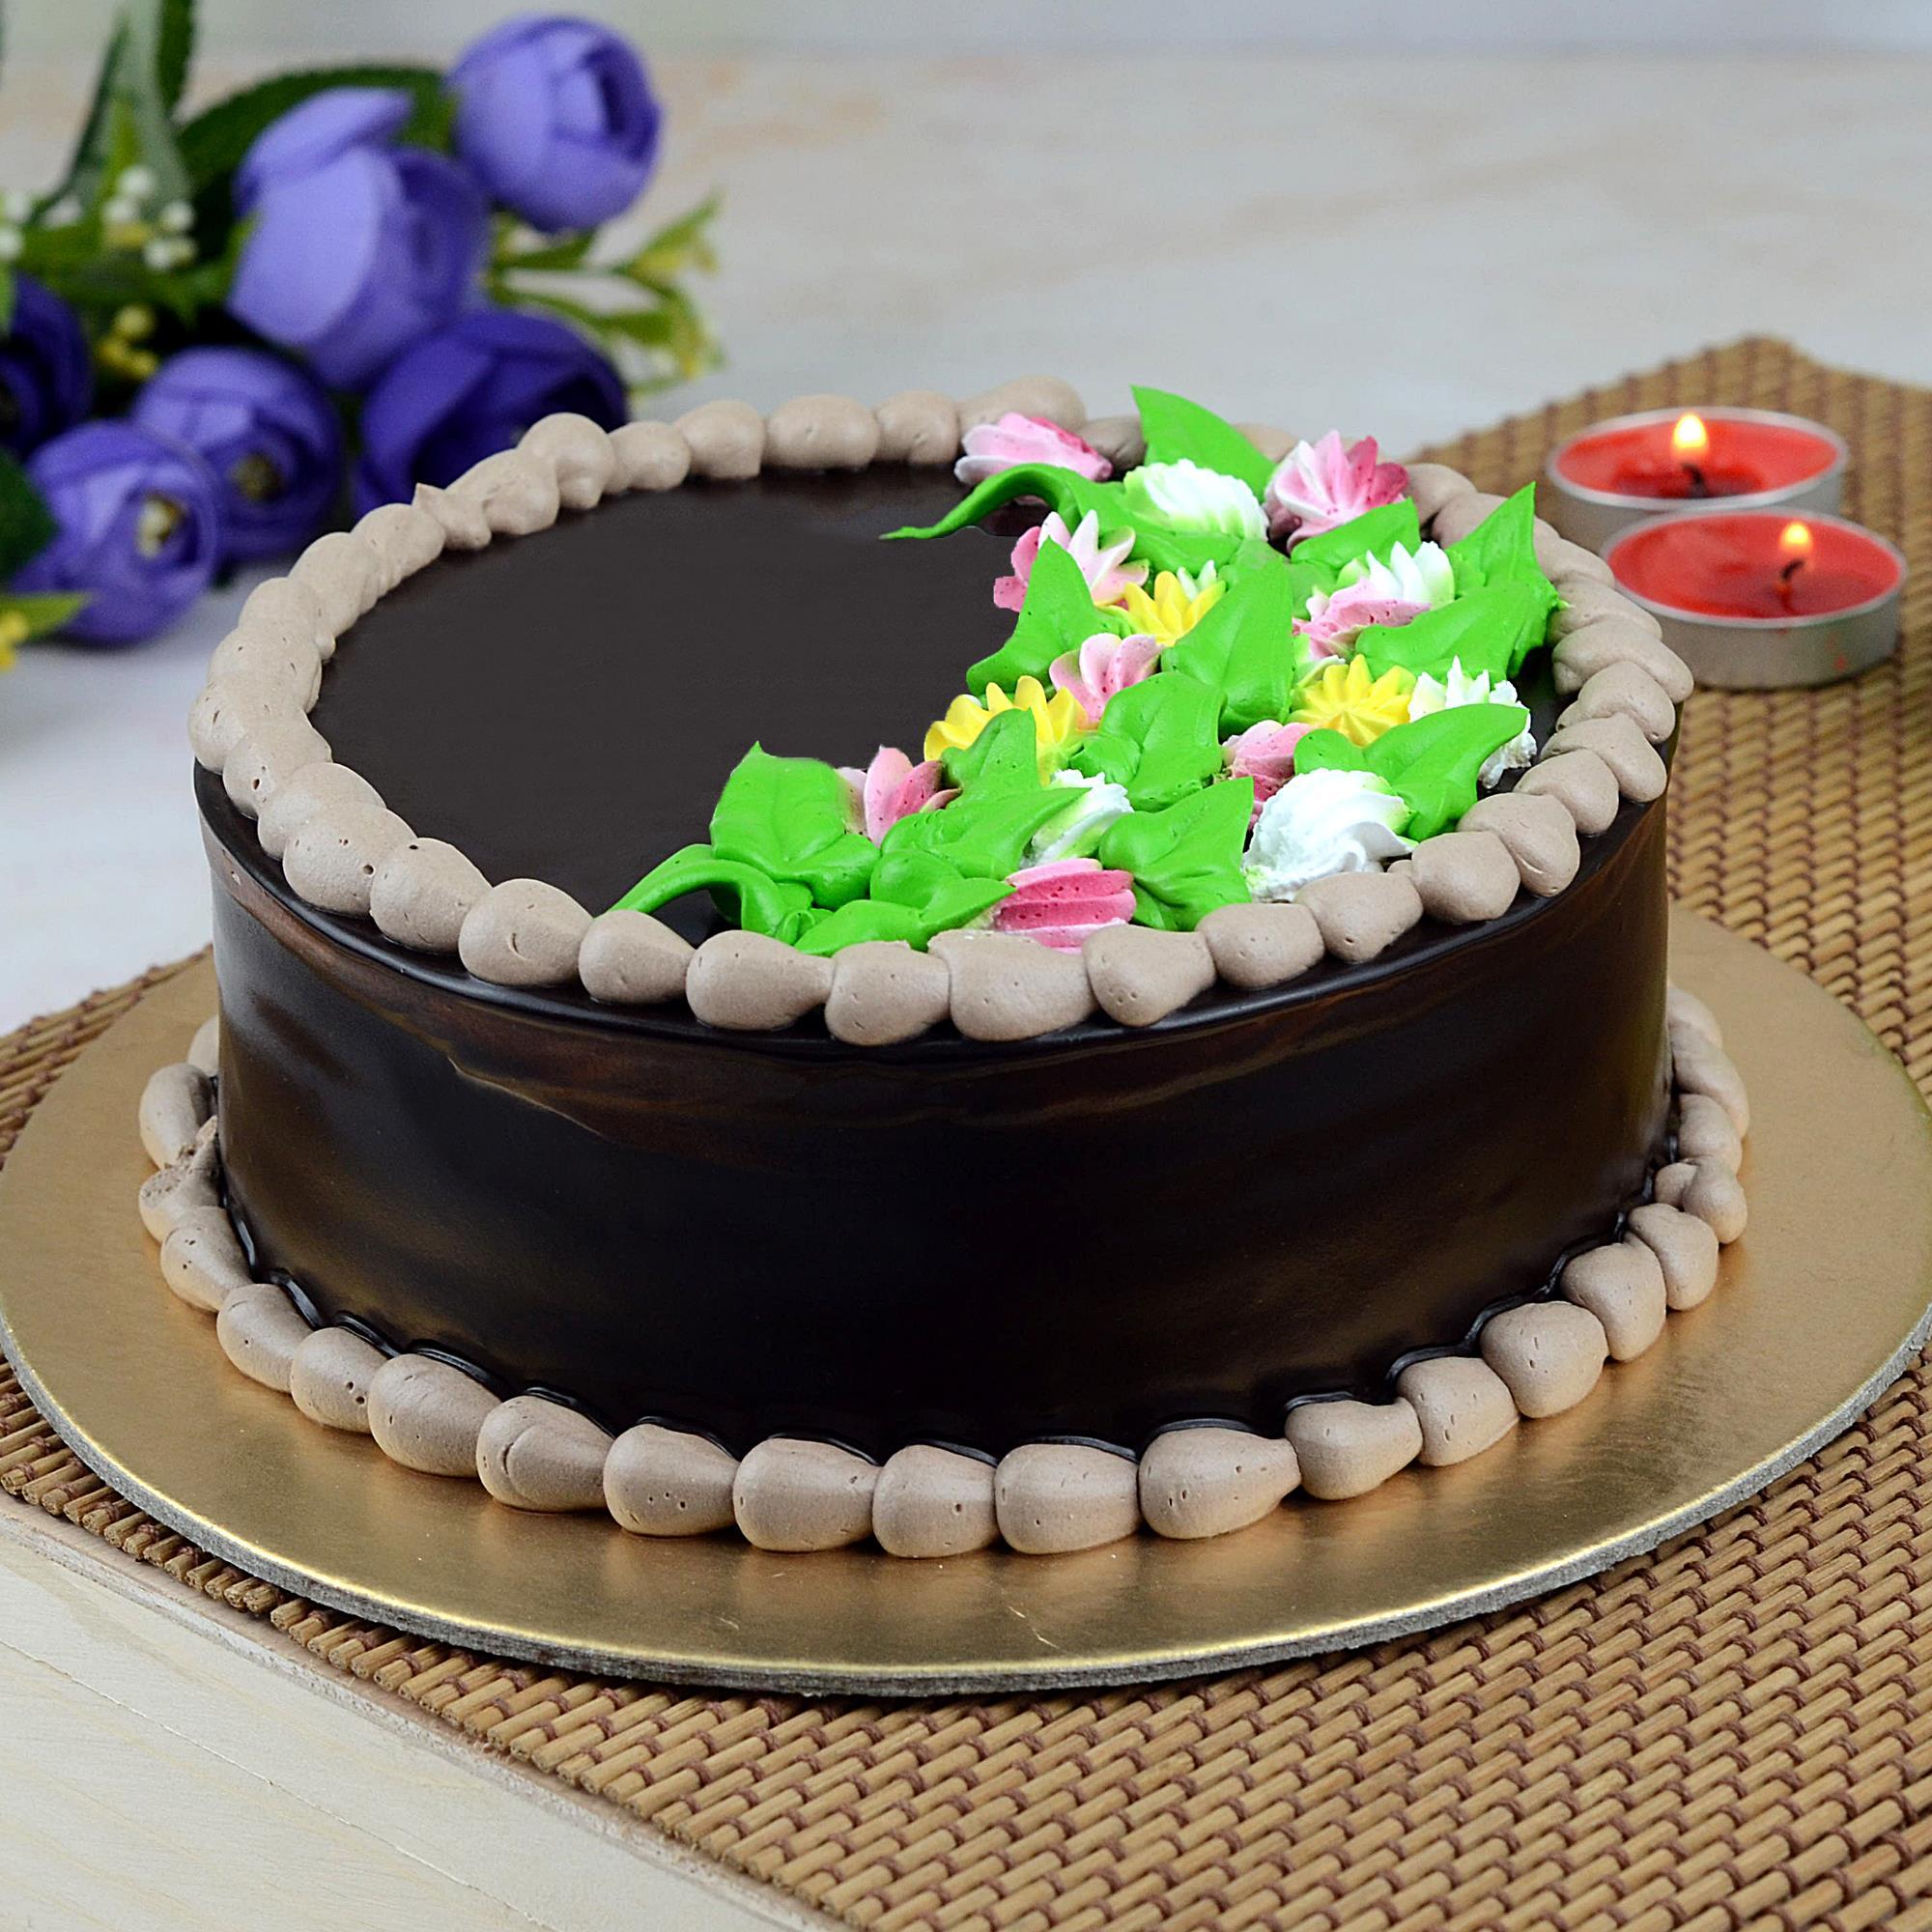 2 Kg. Chocolate Cake | Truly a chocolate lovers delight